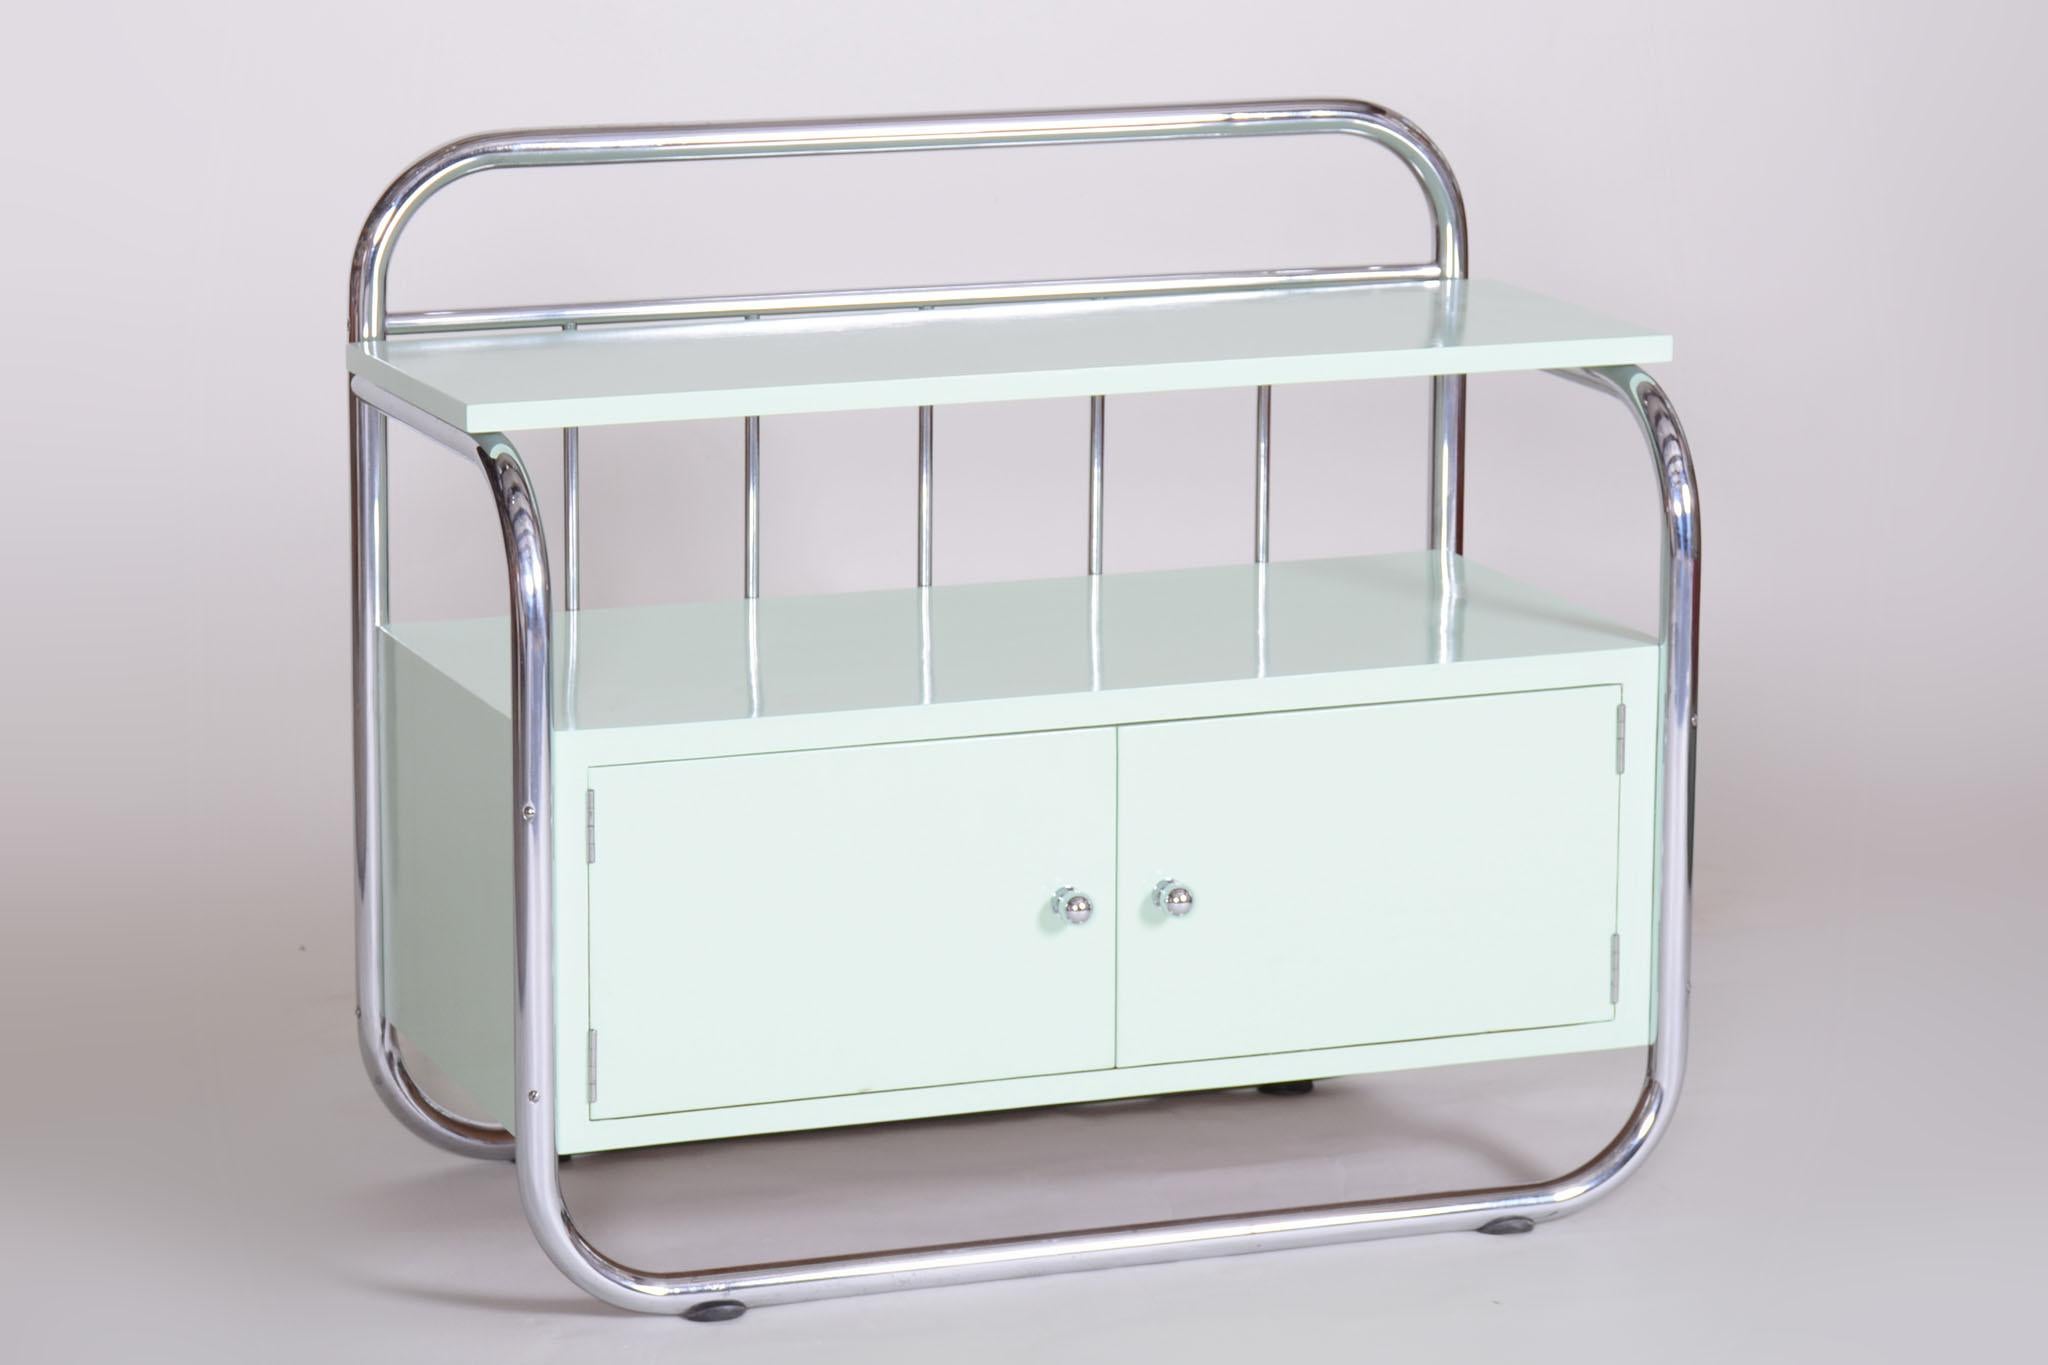 Restored Small Bauhaus Cabinet, Chrome-Plated Steel, Wood, Czechia, 1930s In Good Condition For Sale In Horomerice, CZ